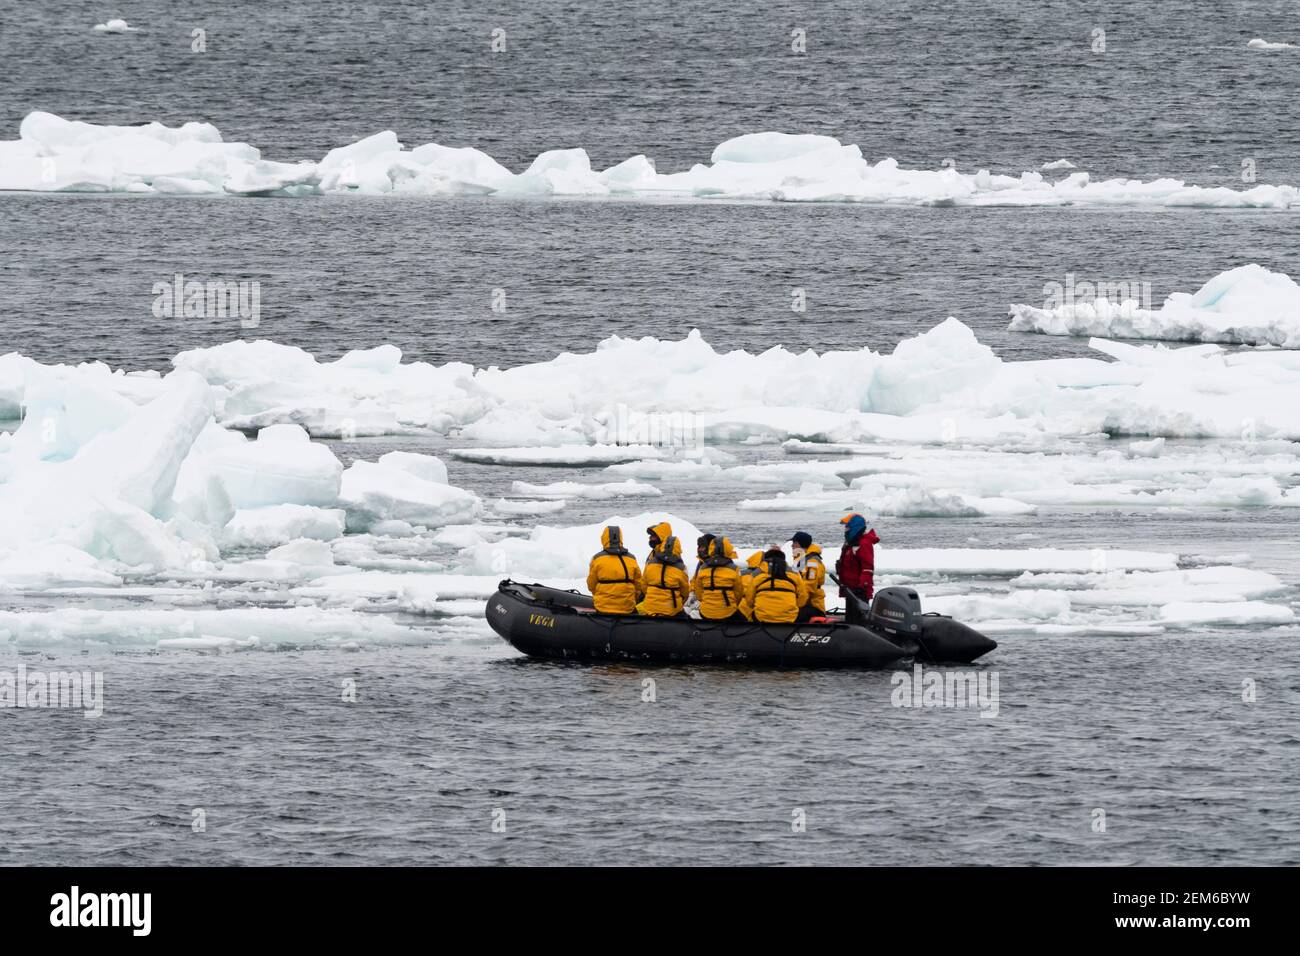 Tourists on inflatable boats exploring  the Polar Ice Cap, 81north of Spitsbergen, Norway. Stock Photo